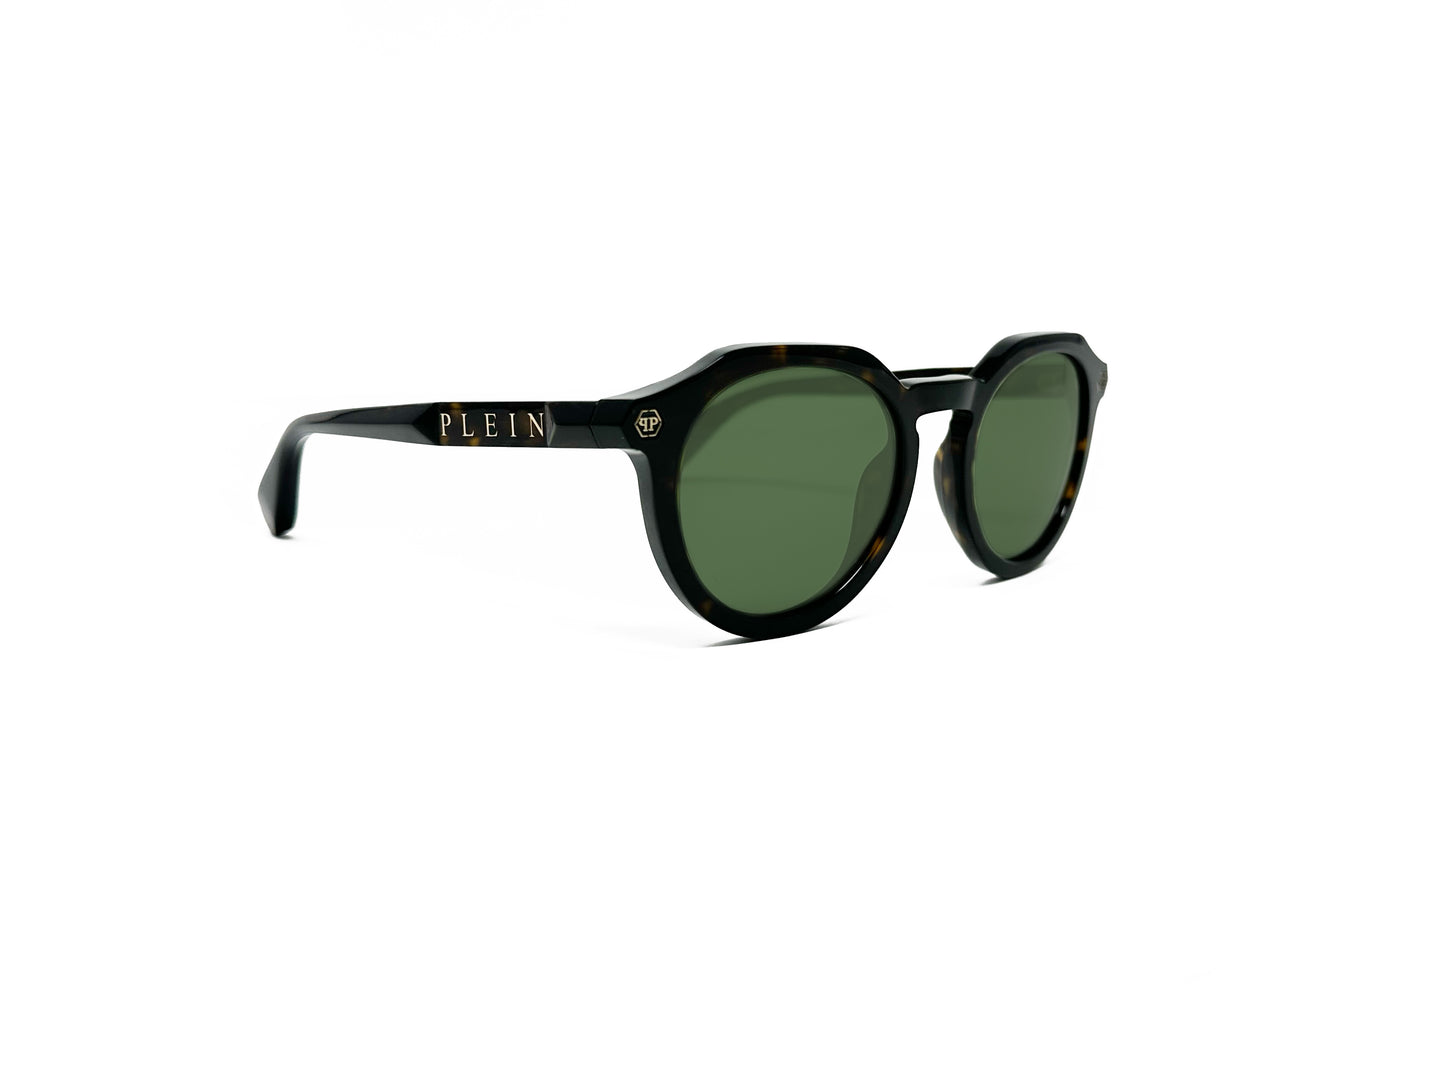 Philipp Plein round acetate sunglass with flat tops and keyhole nose bridge. Model: SPP002. Color: 0722 Tortoise with green lenses. Side view.